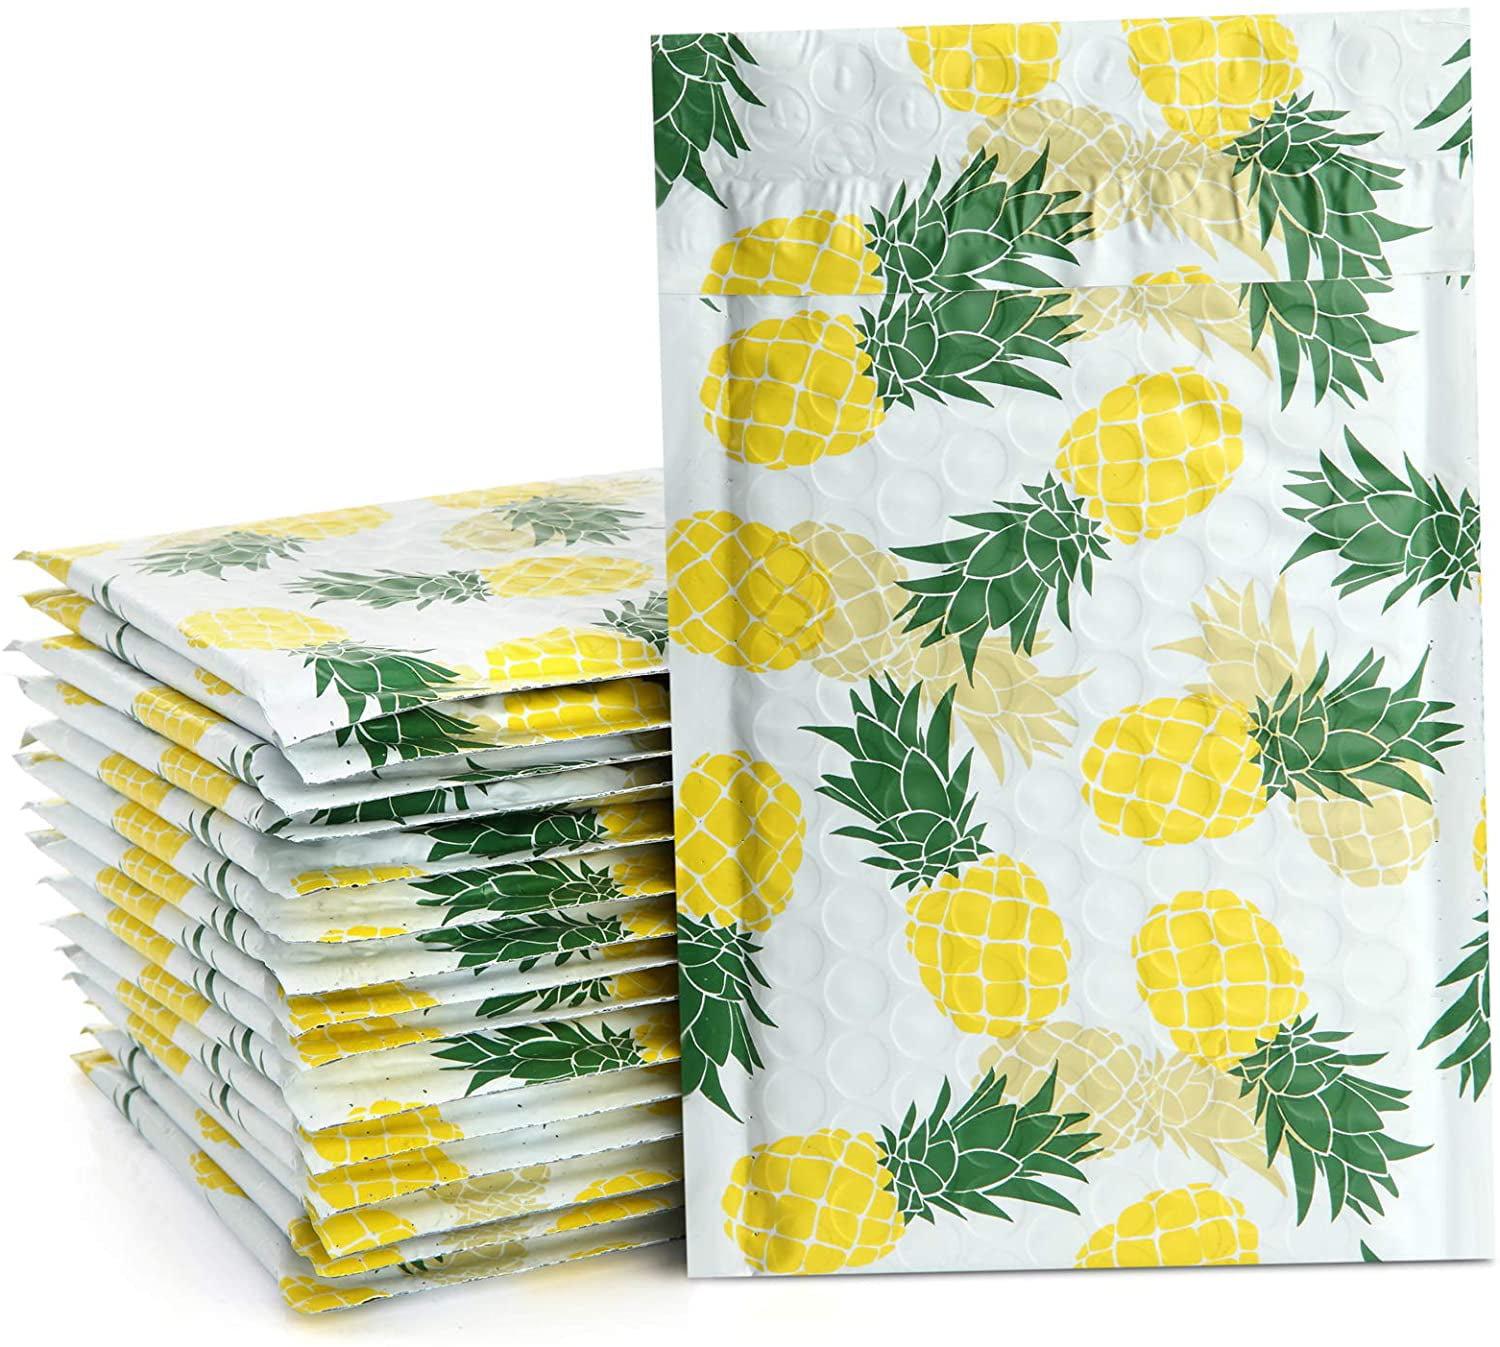 50 Designer Printed Poly Mailers 10X13 Shipping Envelopes Bags Mix Pineapples 